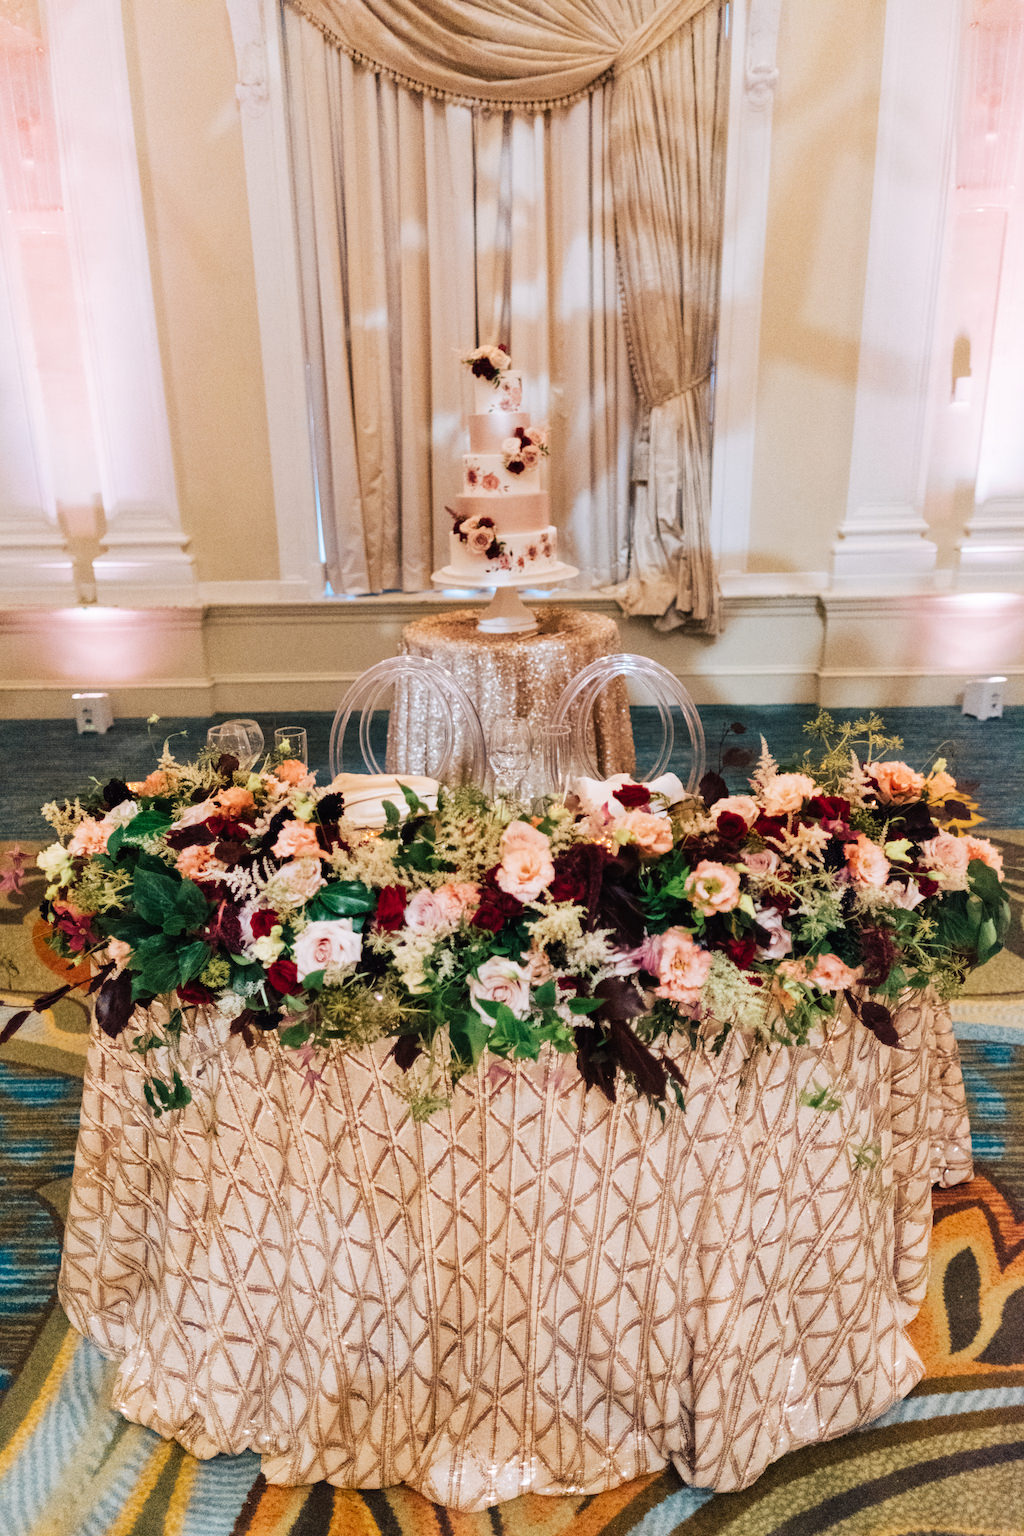 Elegant, Romantic Hotel Wedding Reception Decor, Sweetheart Table with Gold Tablecloth, Burgundy, Dusty Rose, Red, and Greenery Floral Garland, Clear Acrylic Chairs | St. Petersburg Hotel Wedding Venue The Vinoy Renaissance | Tampa Bay Wedding Planner Parties A'la Carte